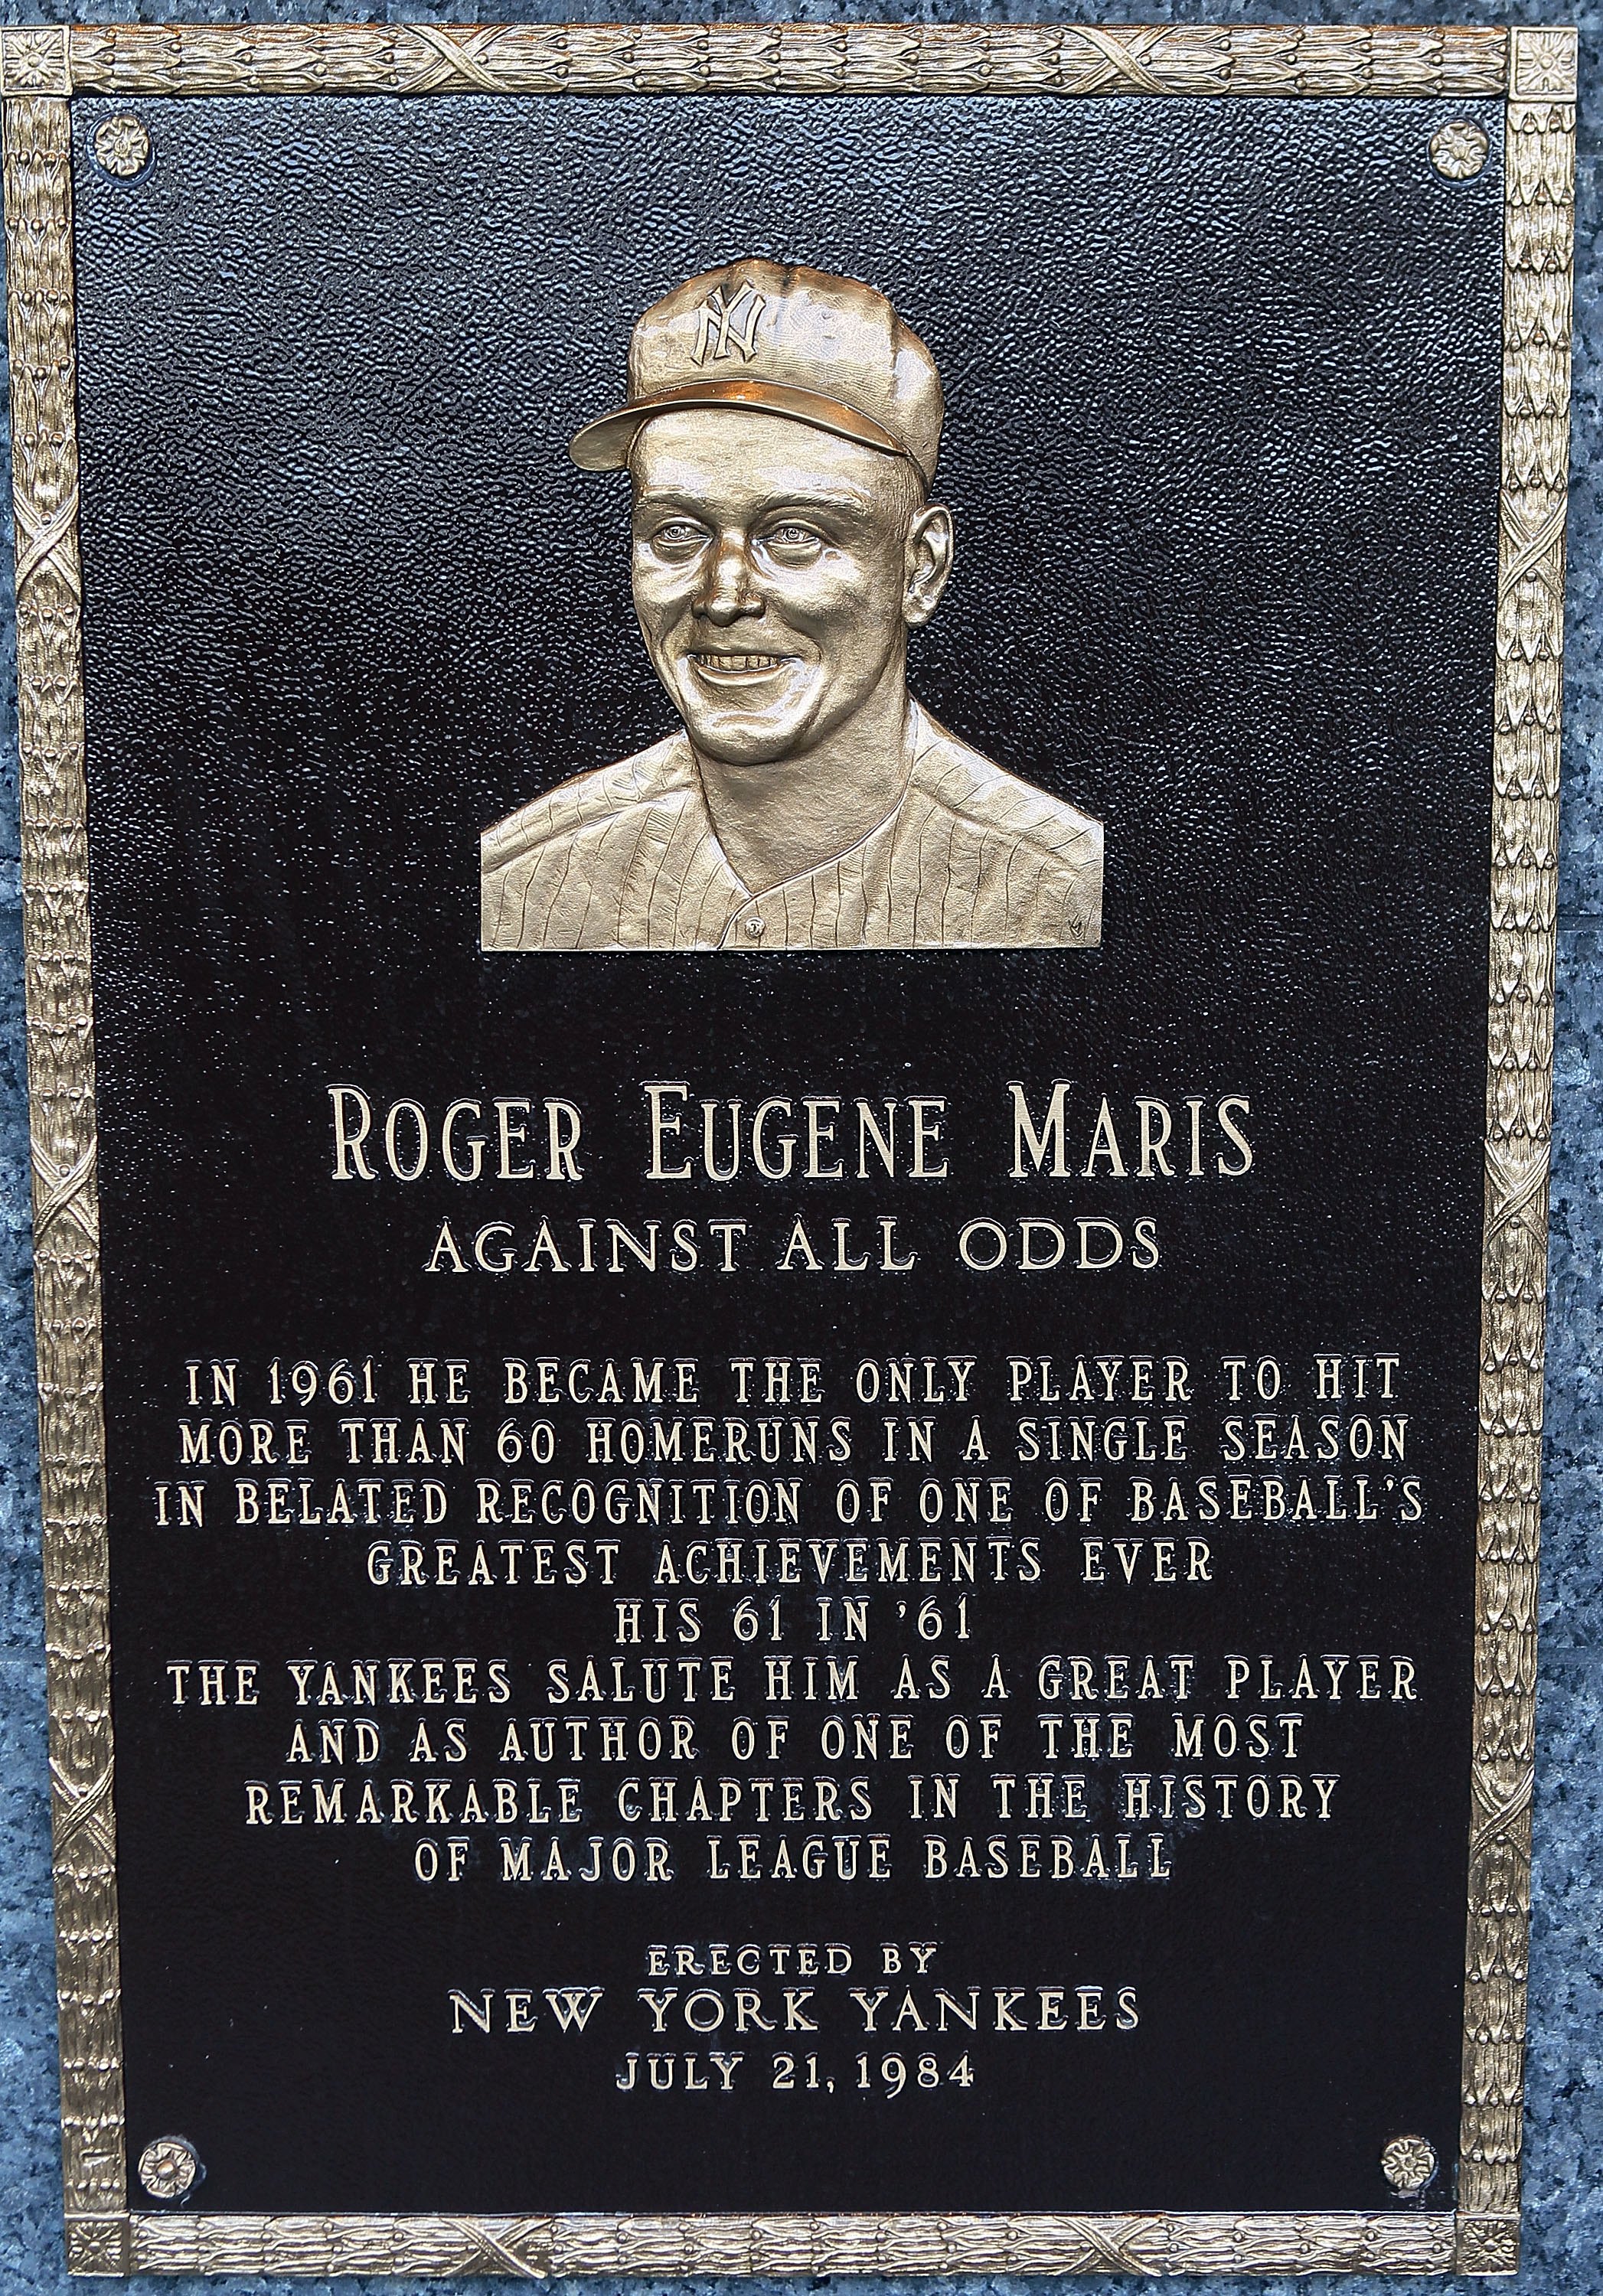 NEW YORK - MAY 02:  The plaque of Roger Maris is seen in Monument Park at Yankee Stadium prior to the game between the New York Yankees and the Chicago White Sox on May 2, 2010 in the Bronx borough of New York City. The Yankees defeated the White Sox 12-3